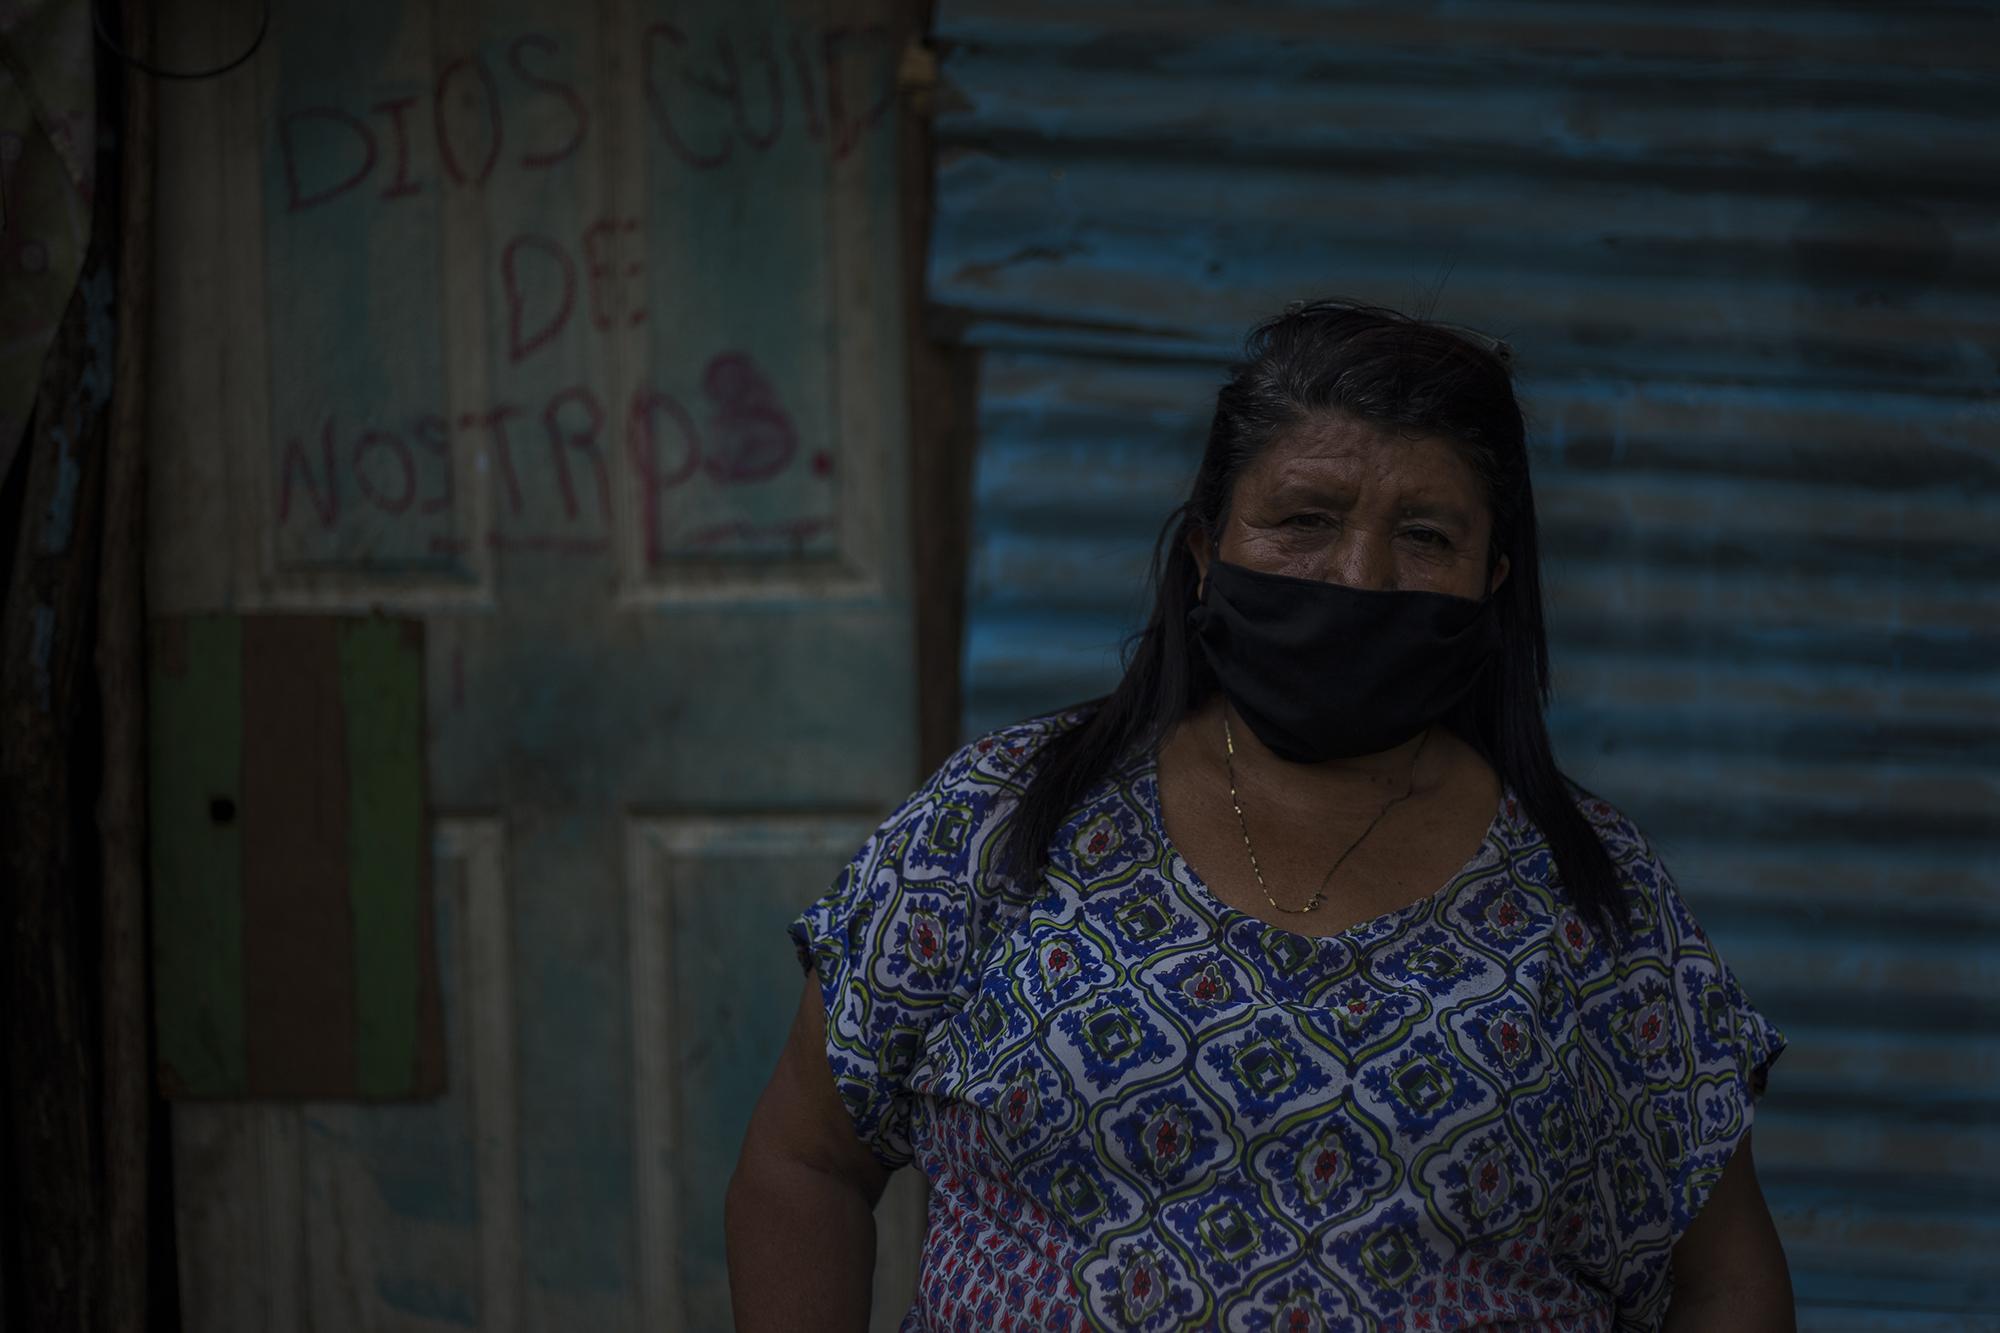 Daysi Quintanilla, a domestic worker, lives in the Chandanta community, in Cuscatancingo. After nearly half a century working as a domestic worker, she